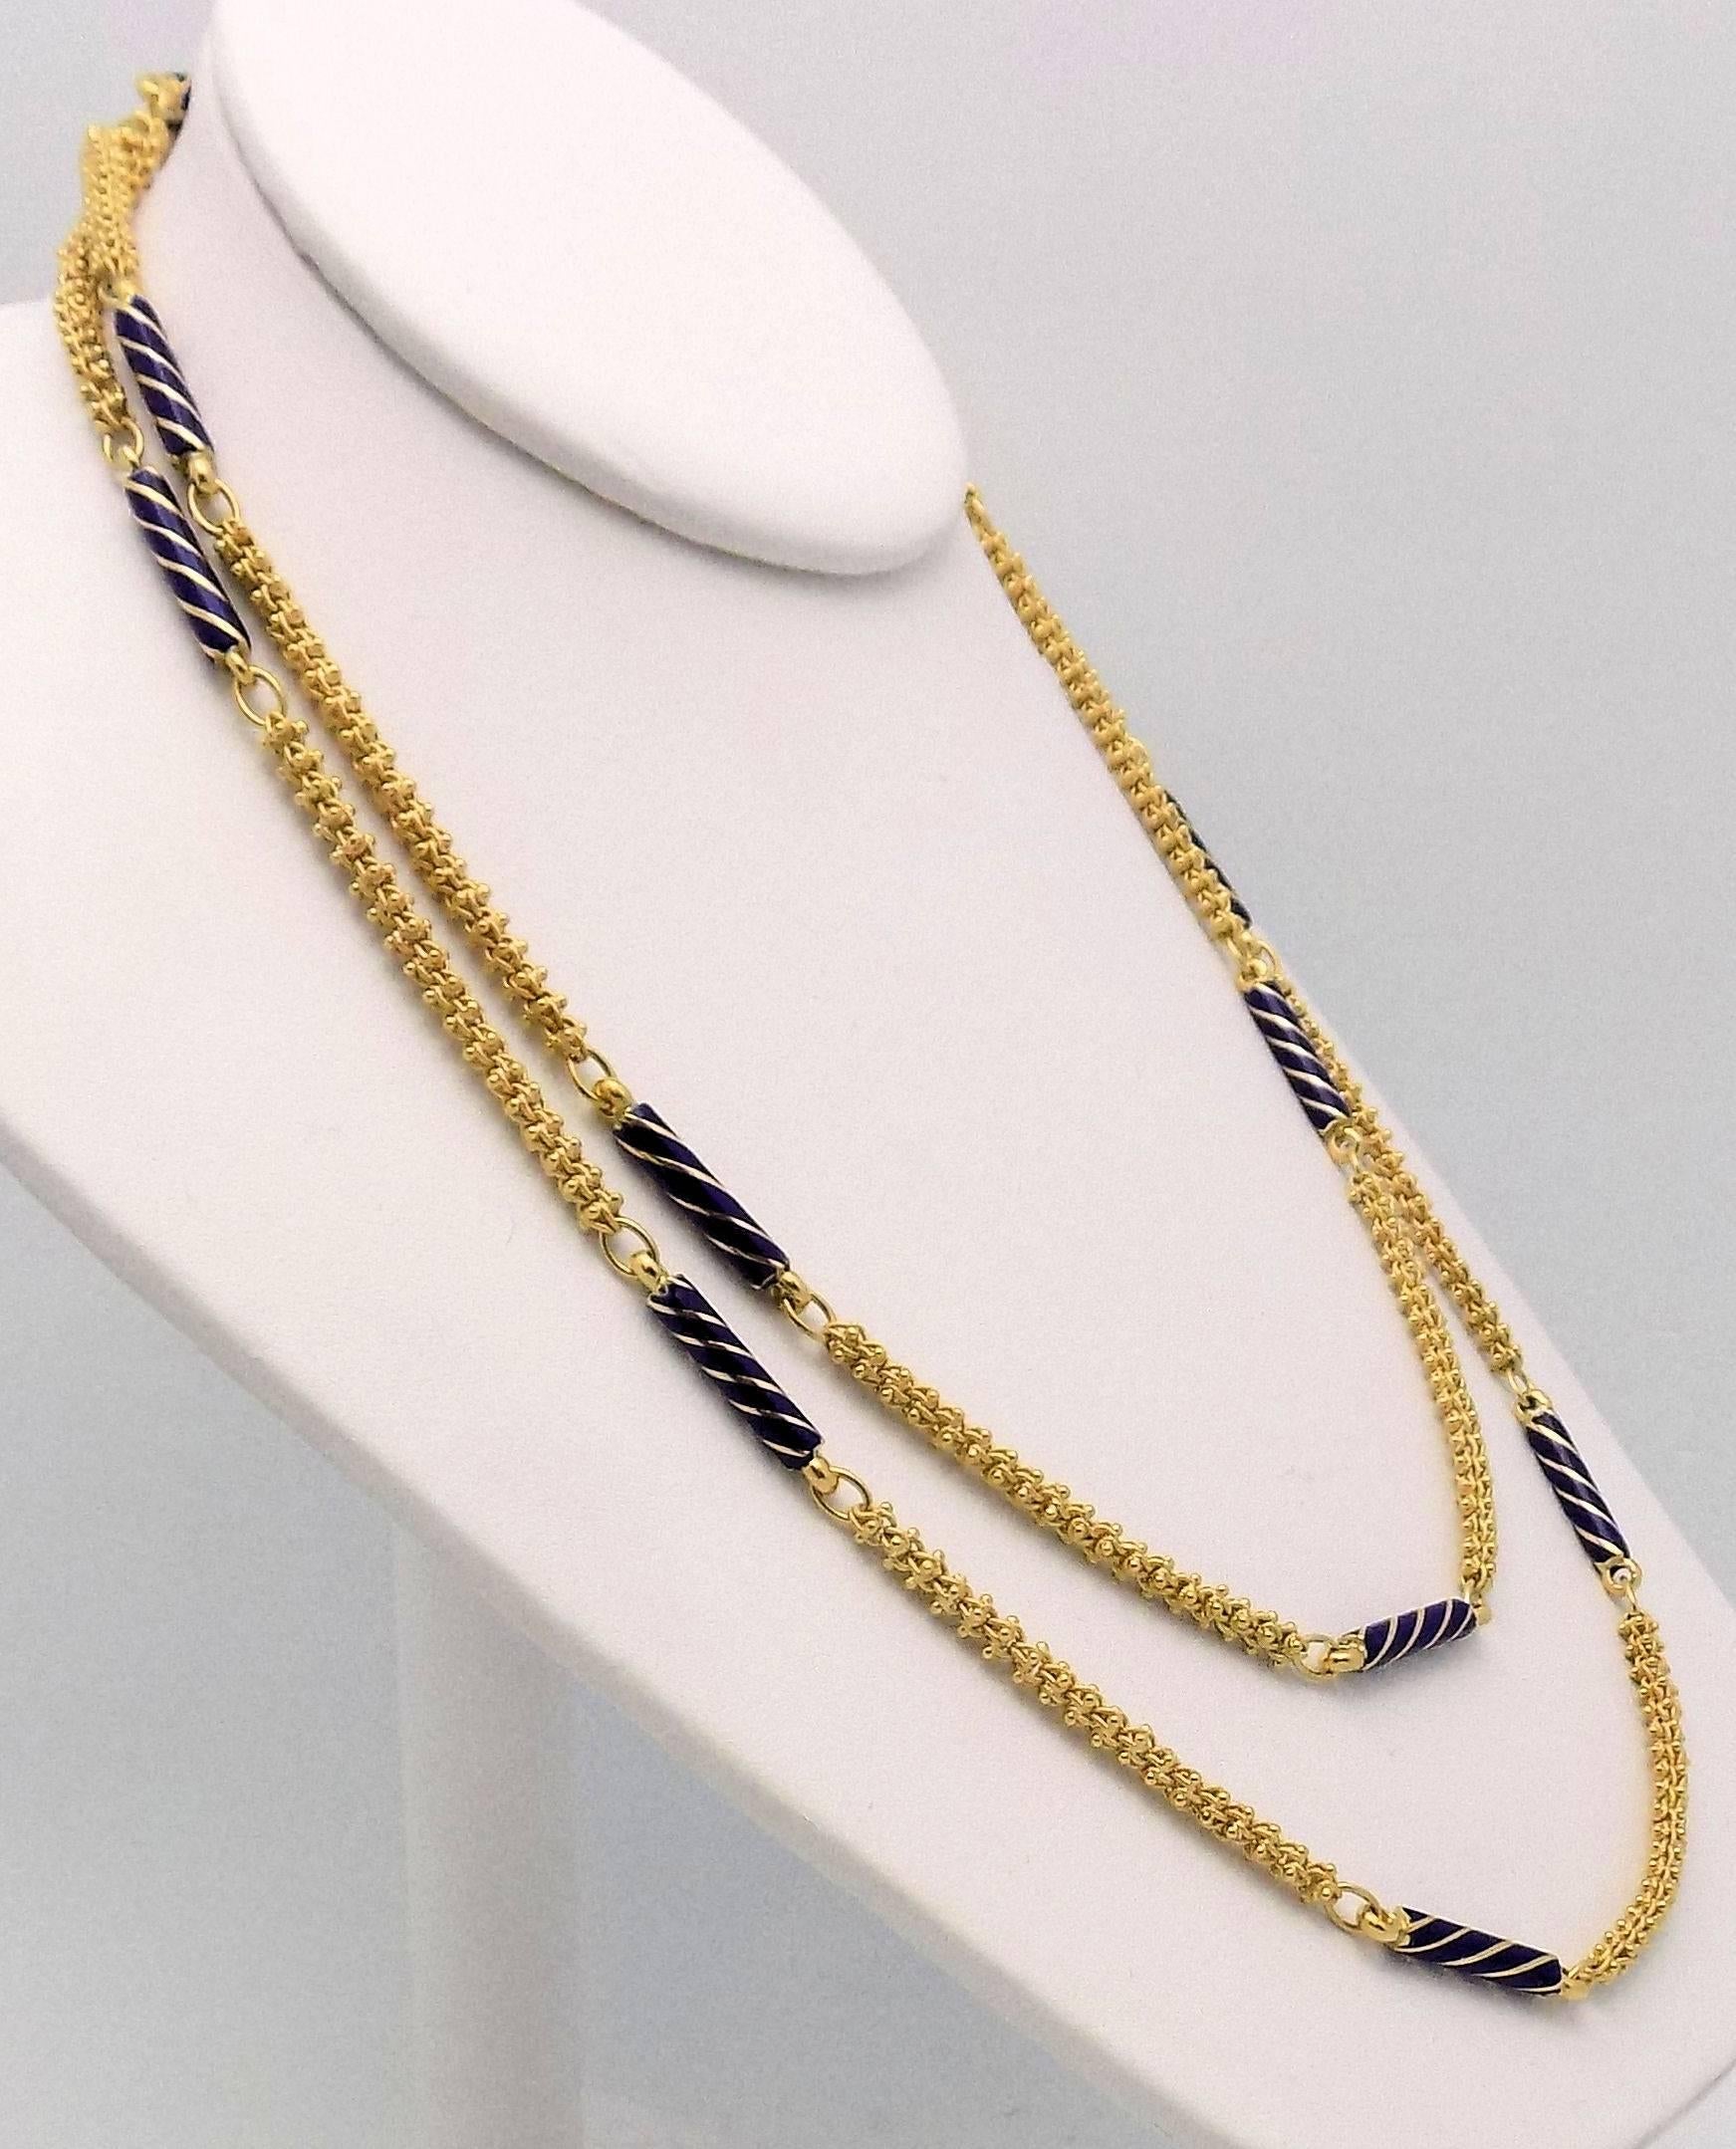 18 Karat Yellow Gold Necklace with Etruscan Link Chain & 12 Cobalt Blue Enamel Rod Shape Beads with Gold Swirls (Minor Enamel Losses), 39